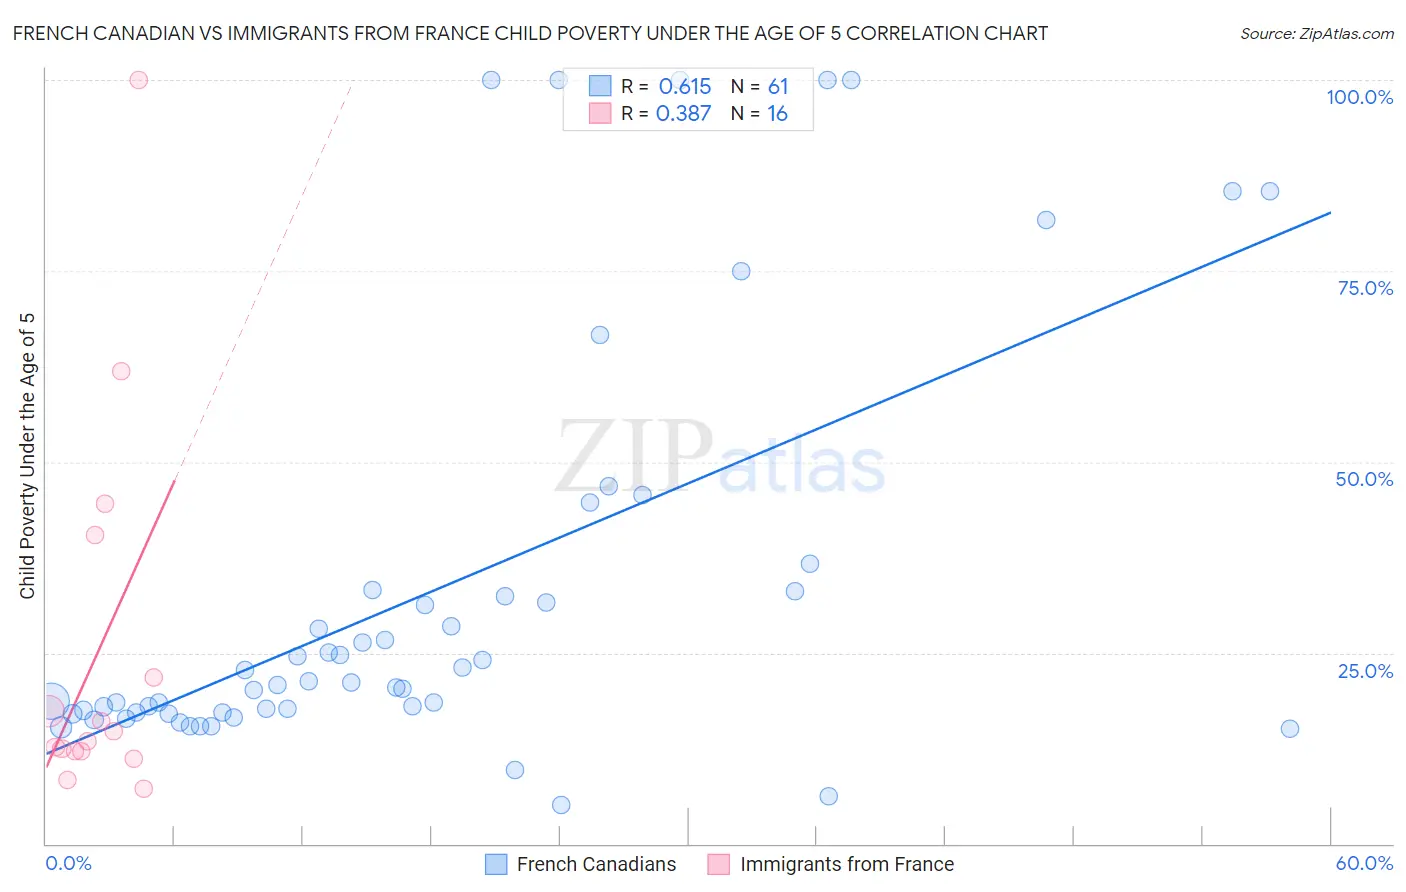 French Canadian vs Immigrants from France Child Poverty Under the Age of 5